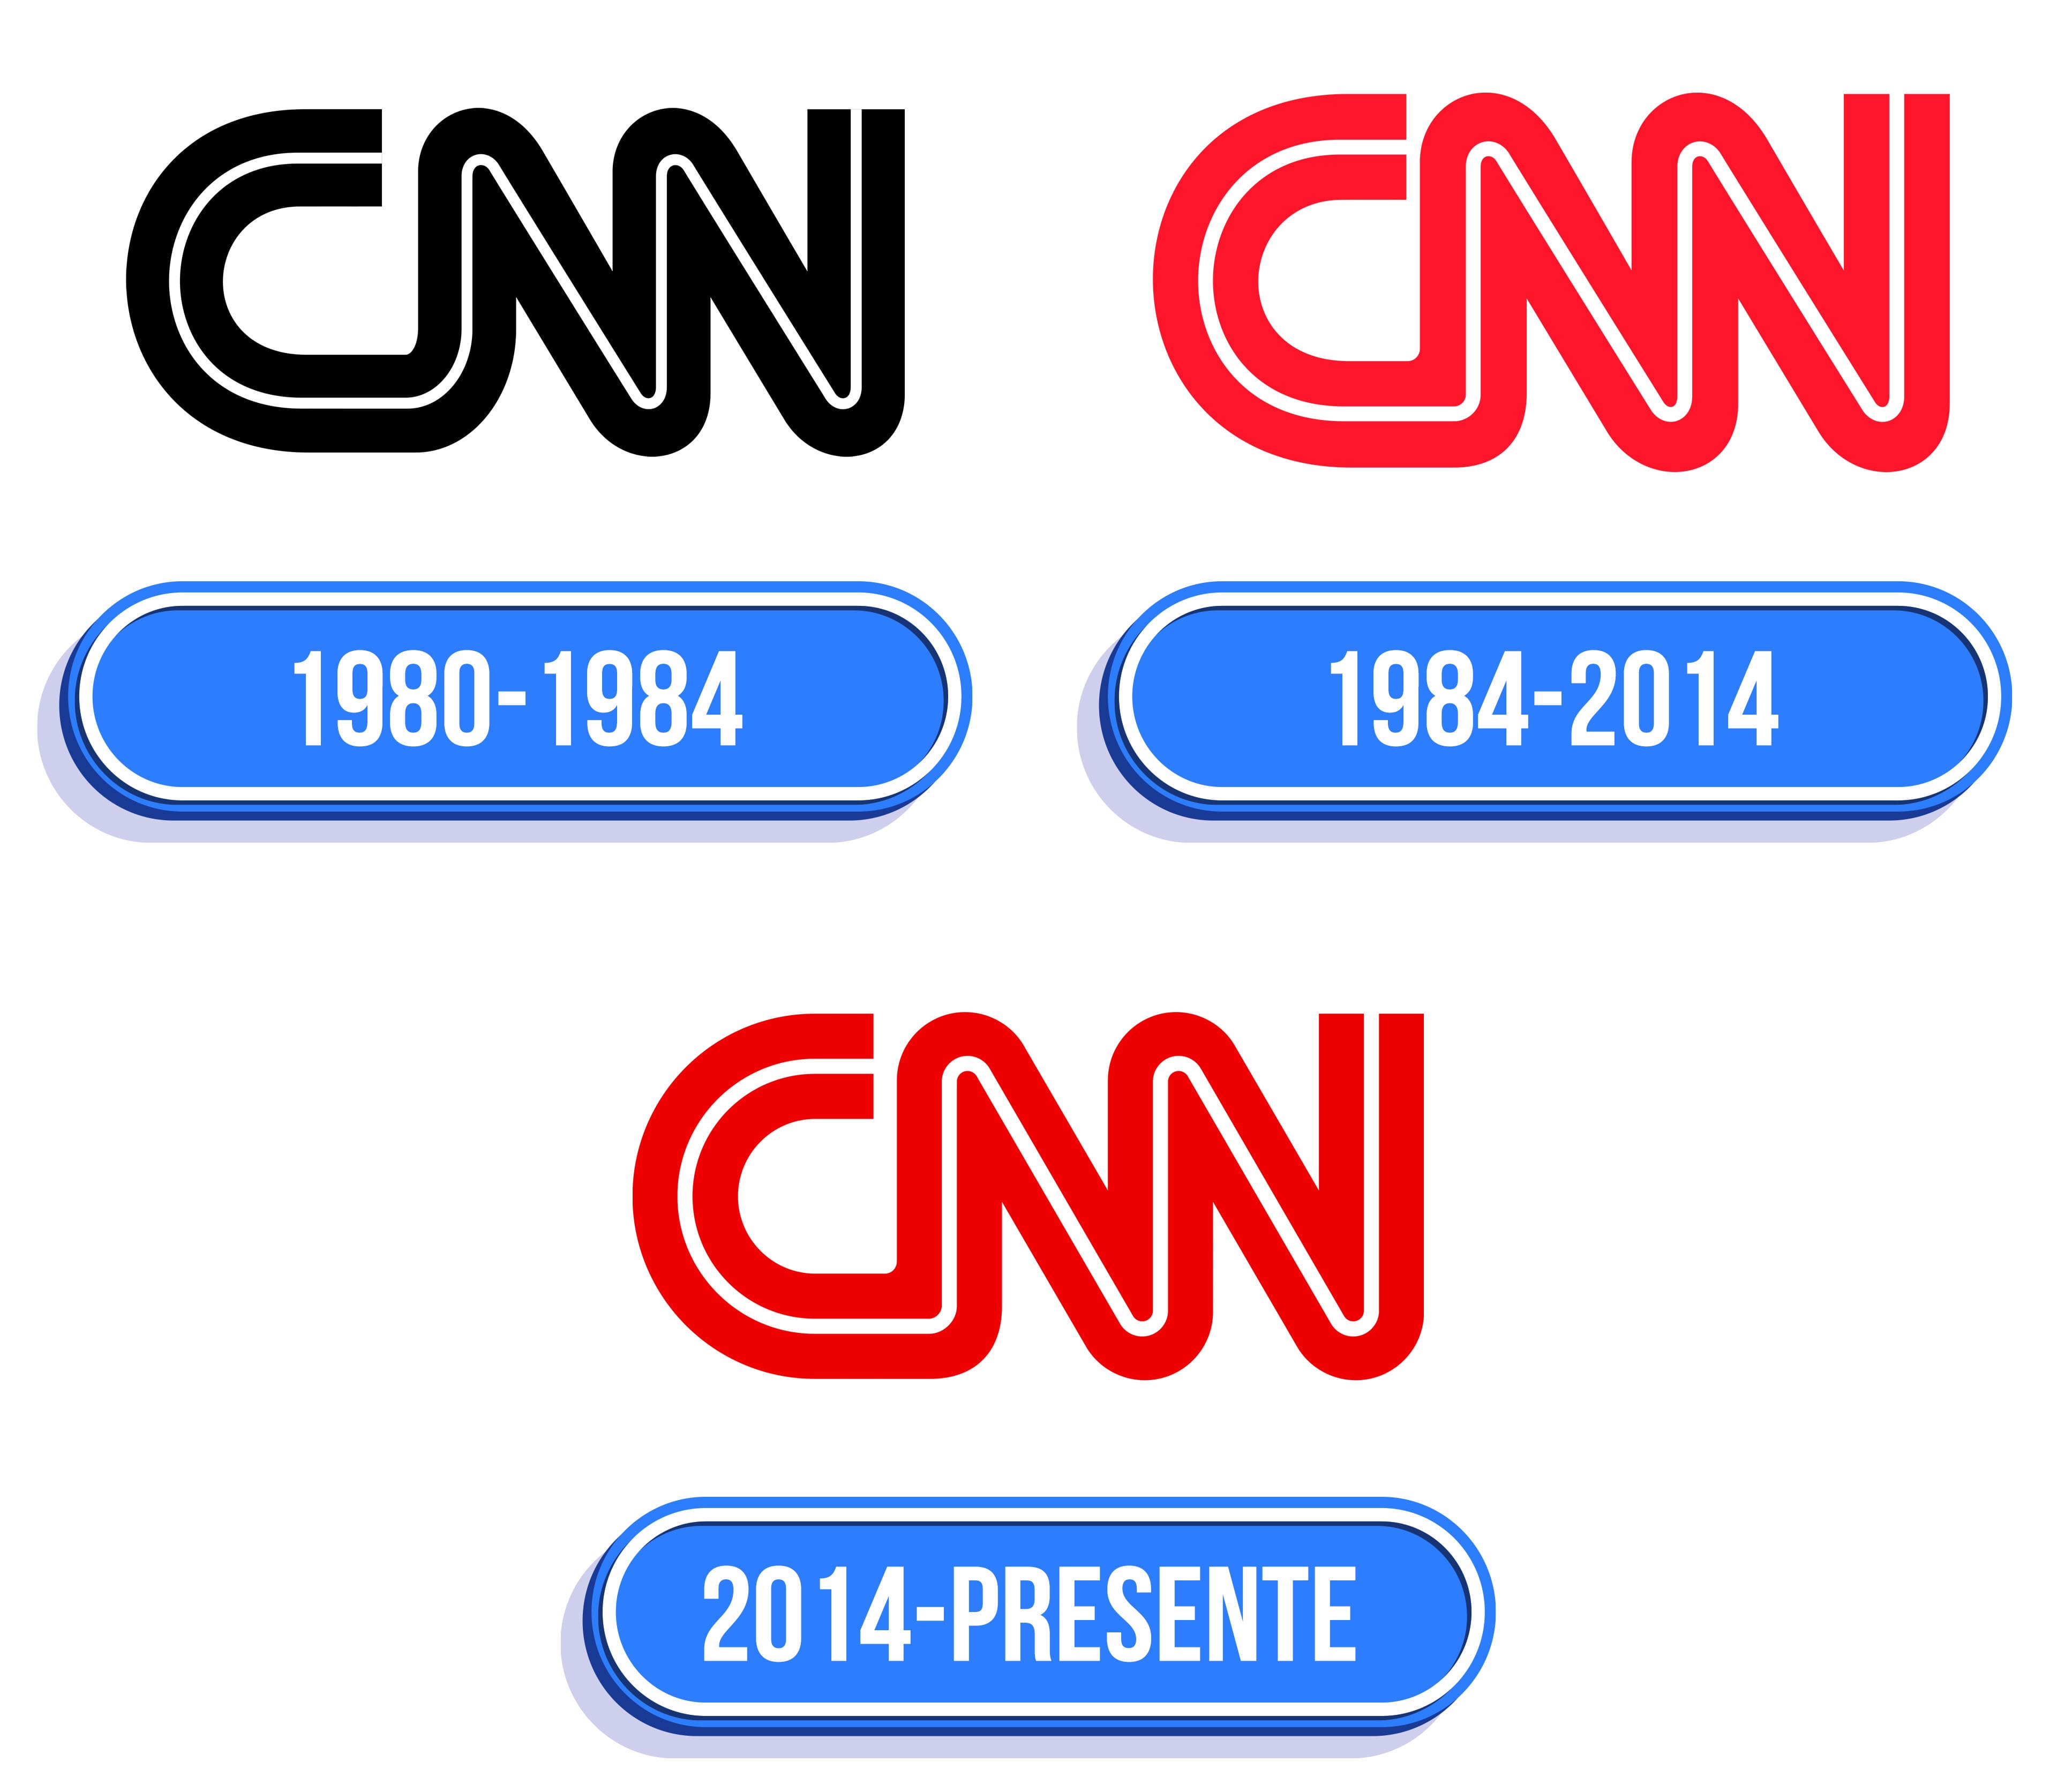 Cnn logo, symbol, meaning, history, png 136